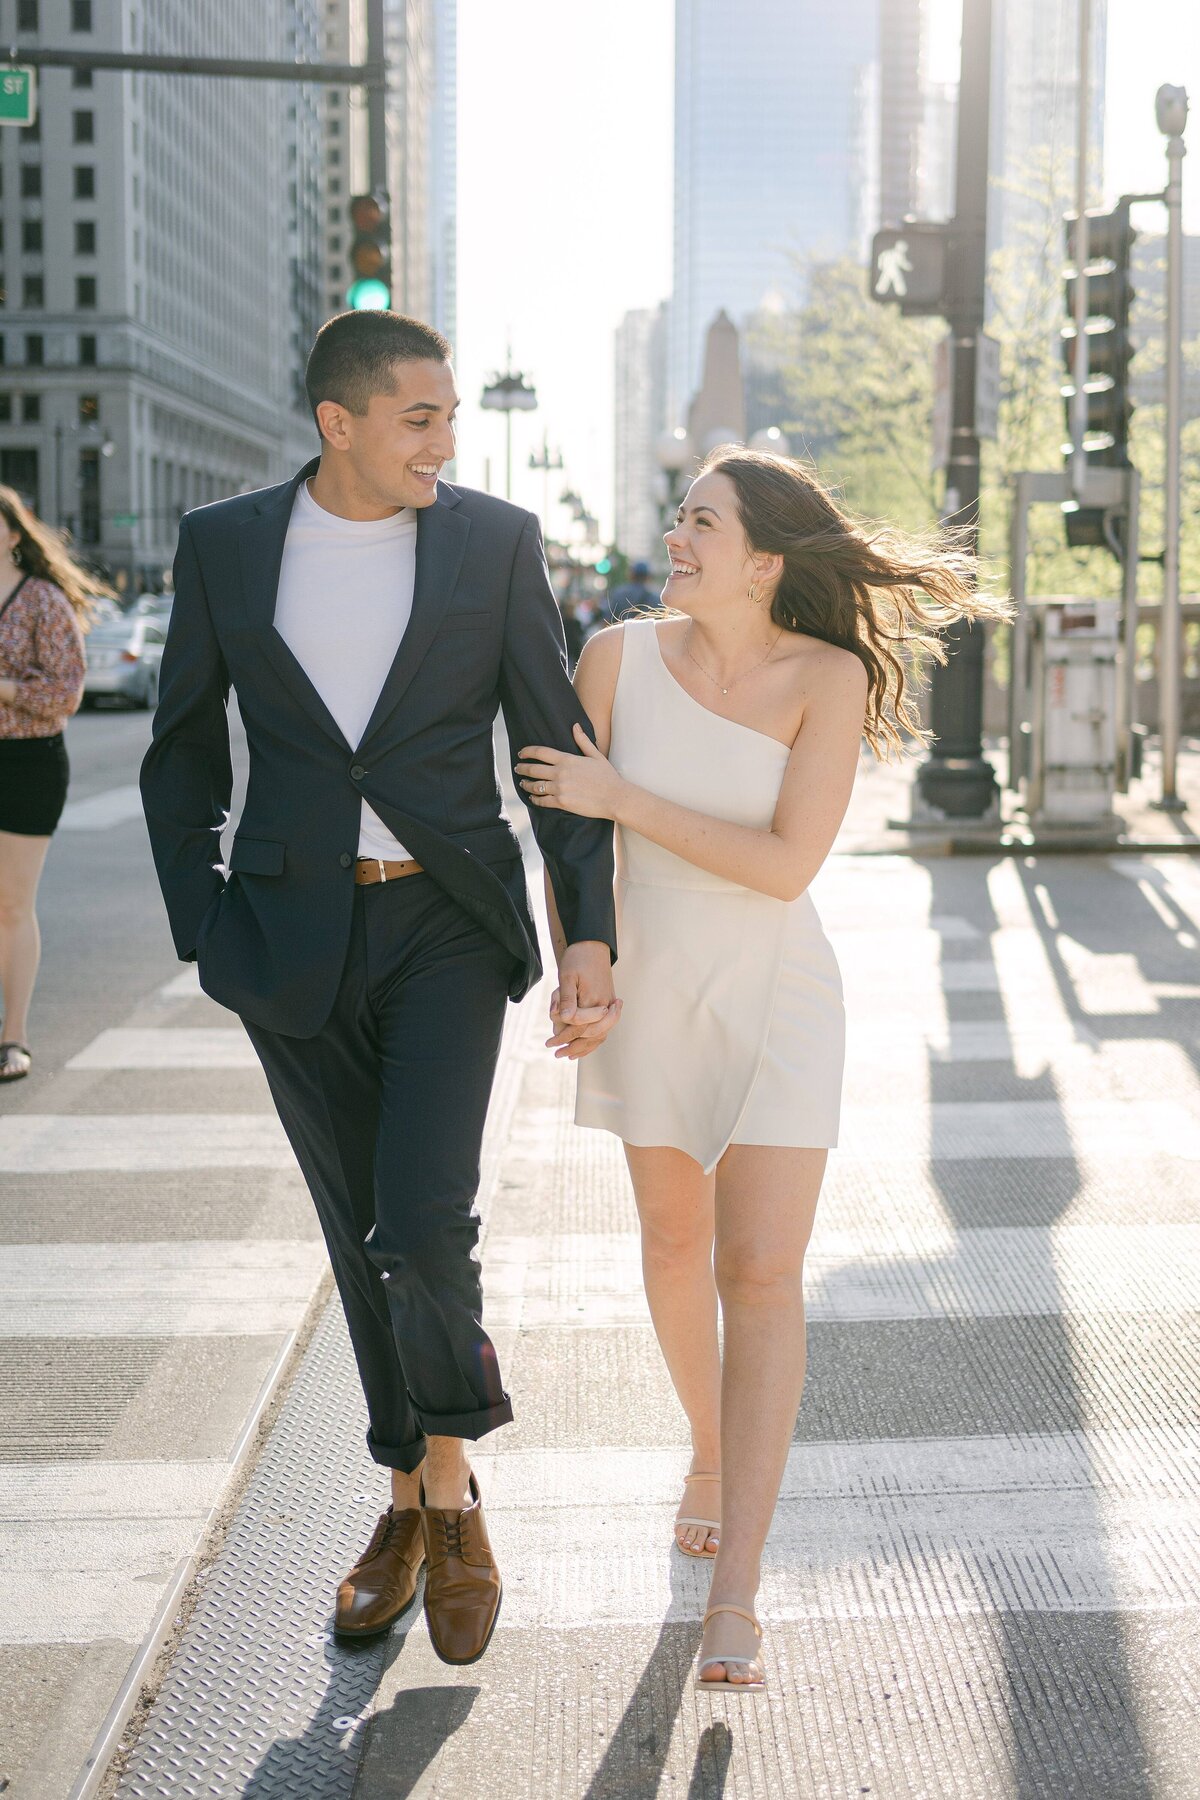 Katie-Whitcomb-Photography-chicago-engagement-session-Marie-Barret-003